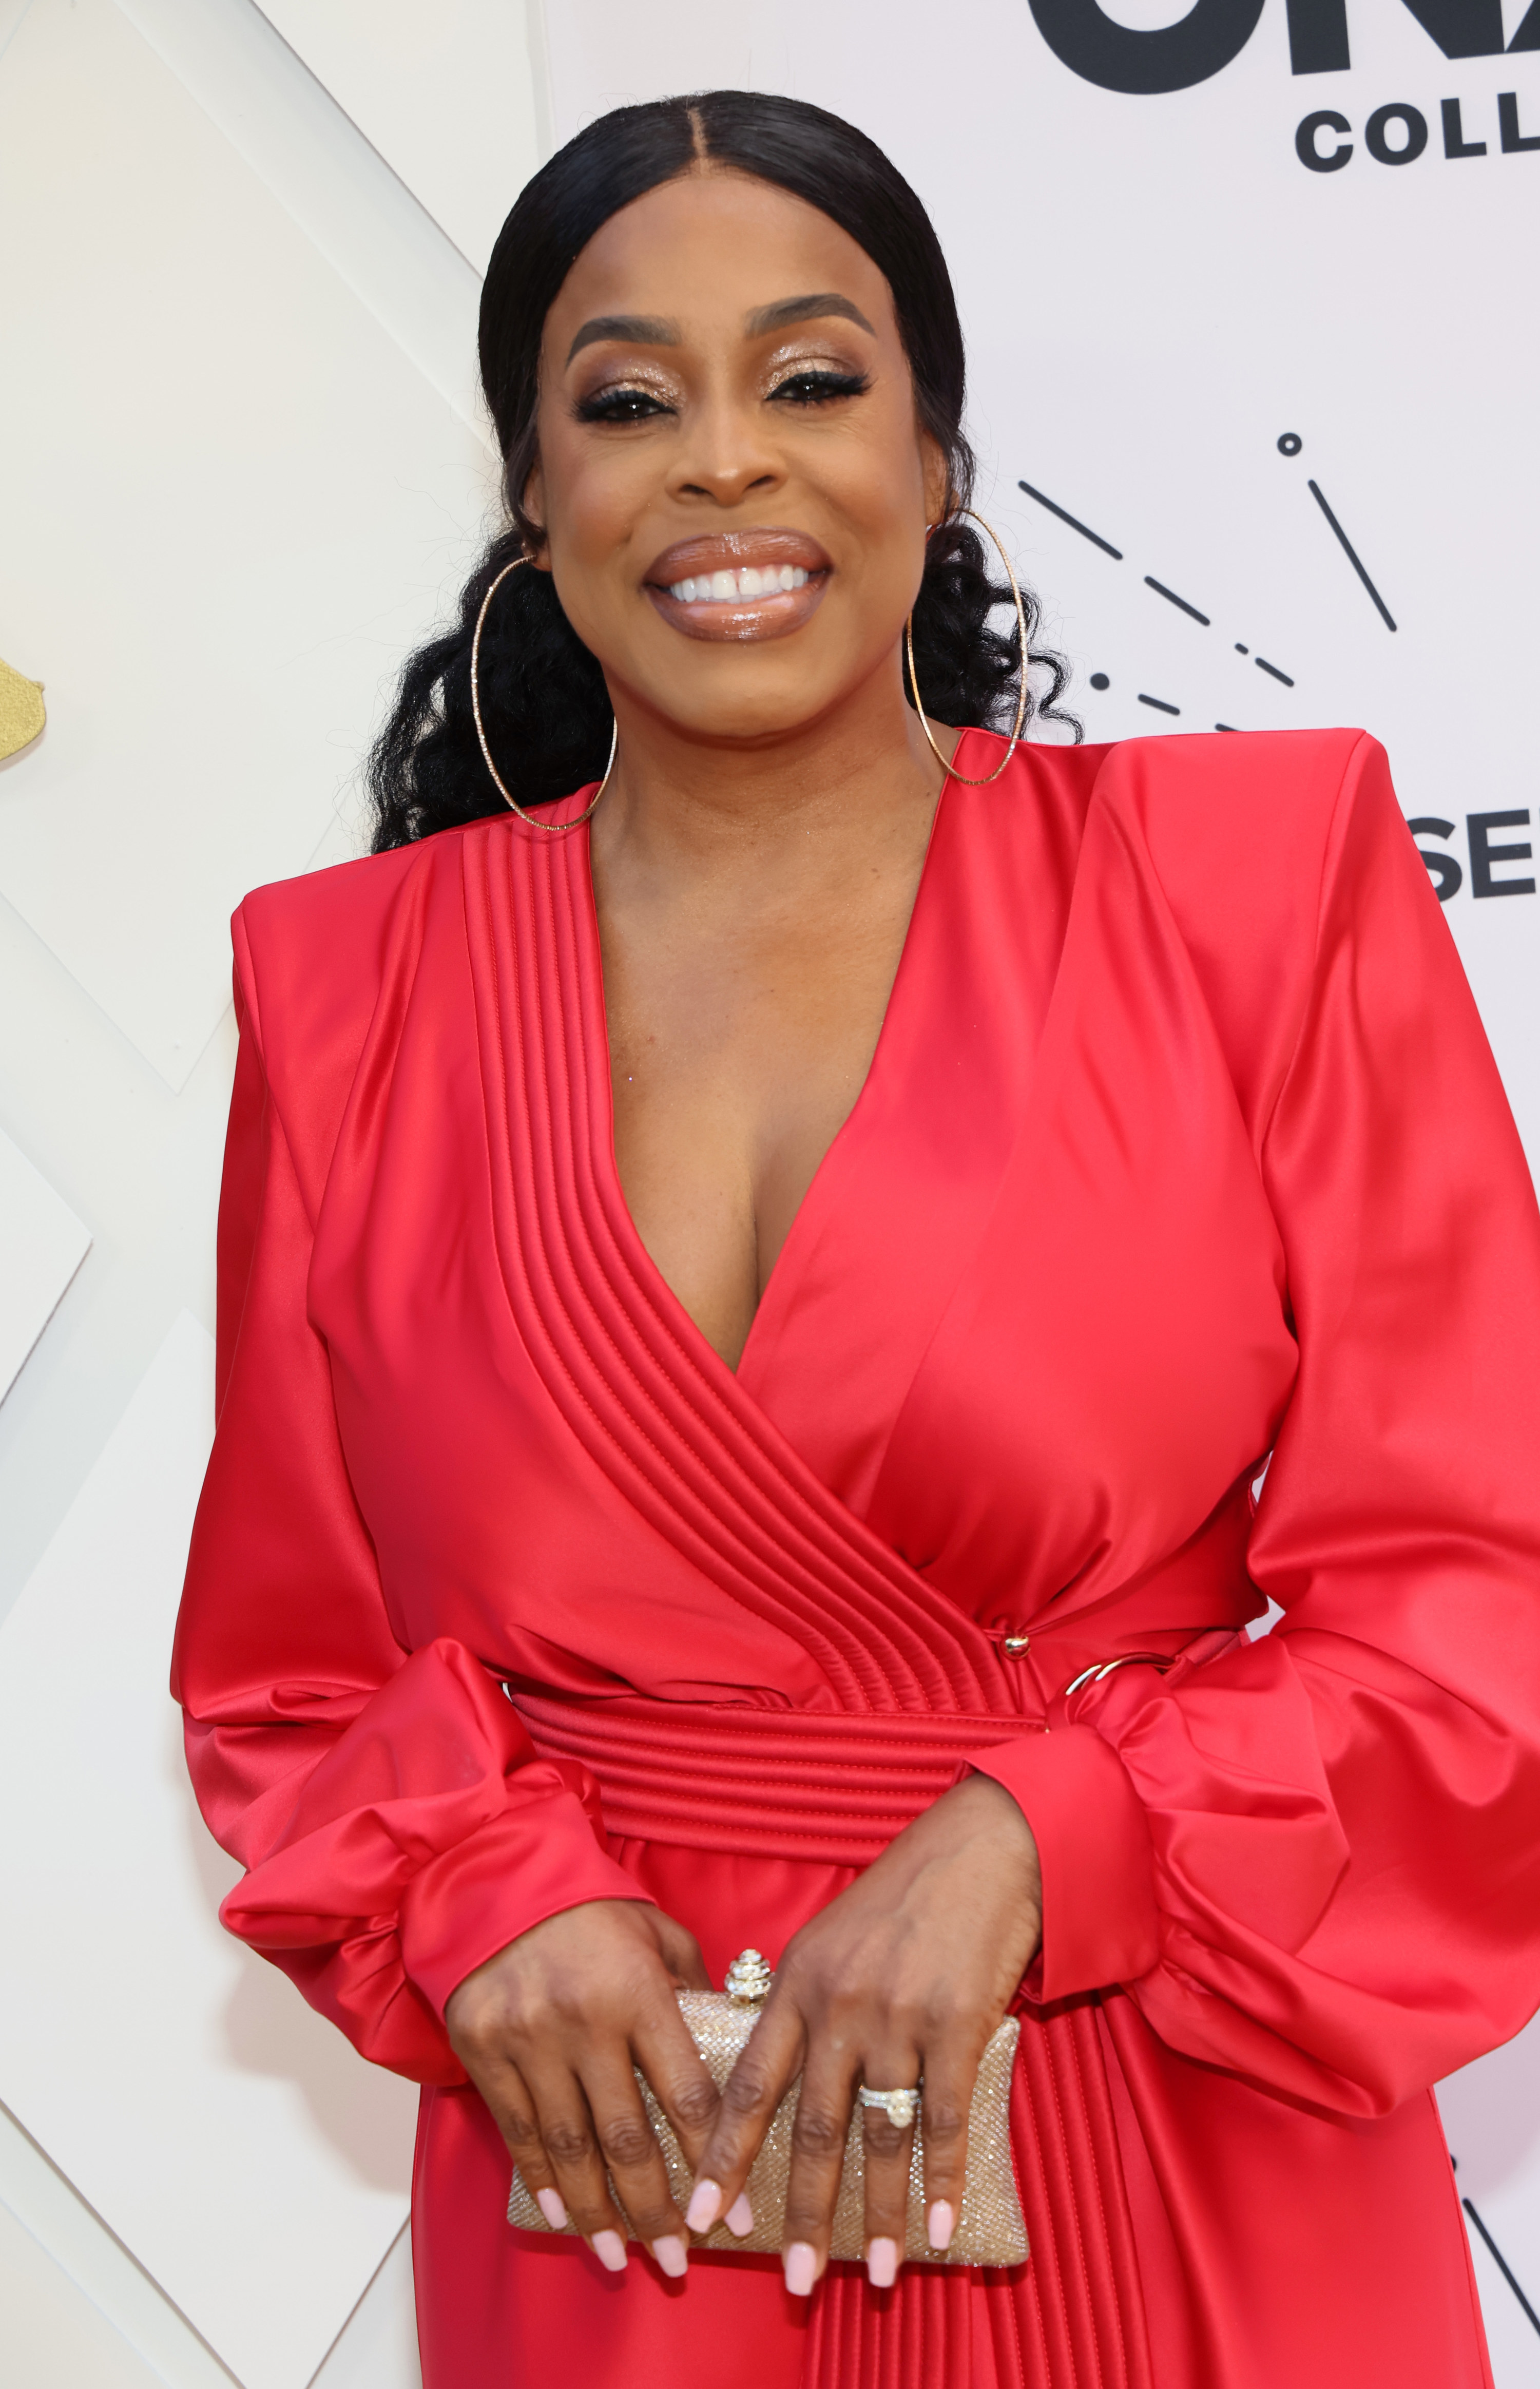 Niecy Nash wearing a long sleeved dress and holding a small clutch at an event